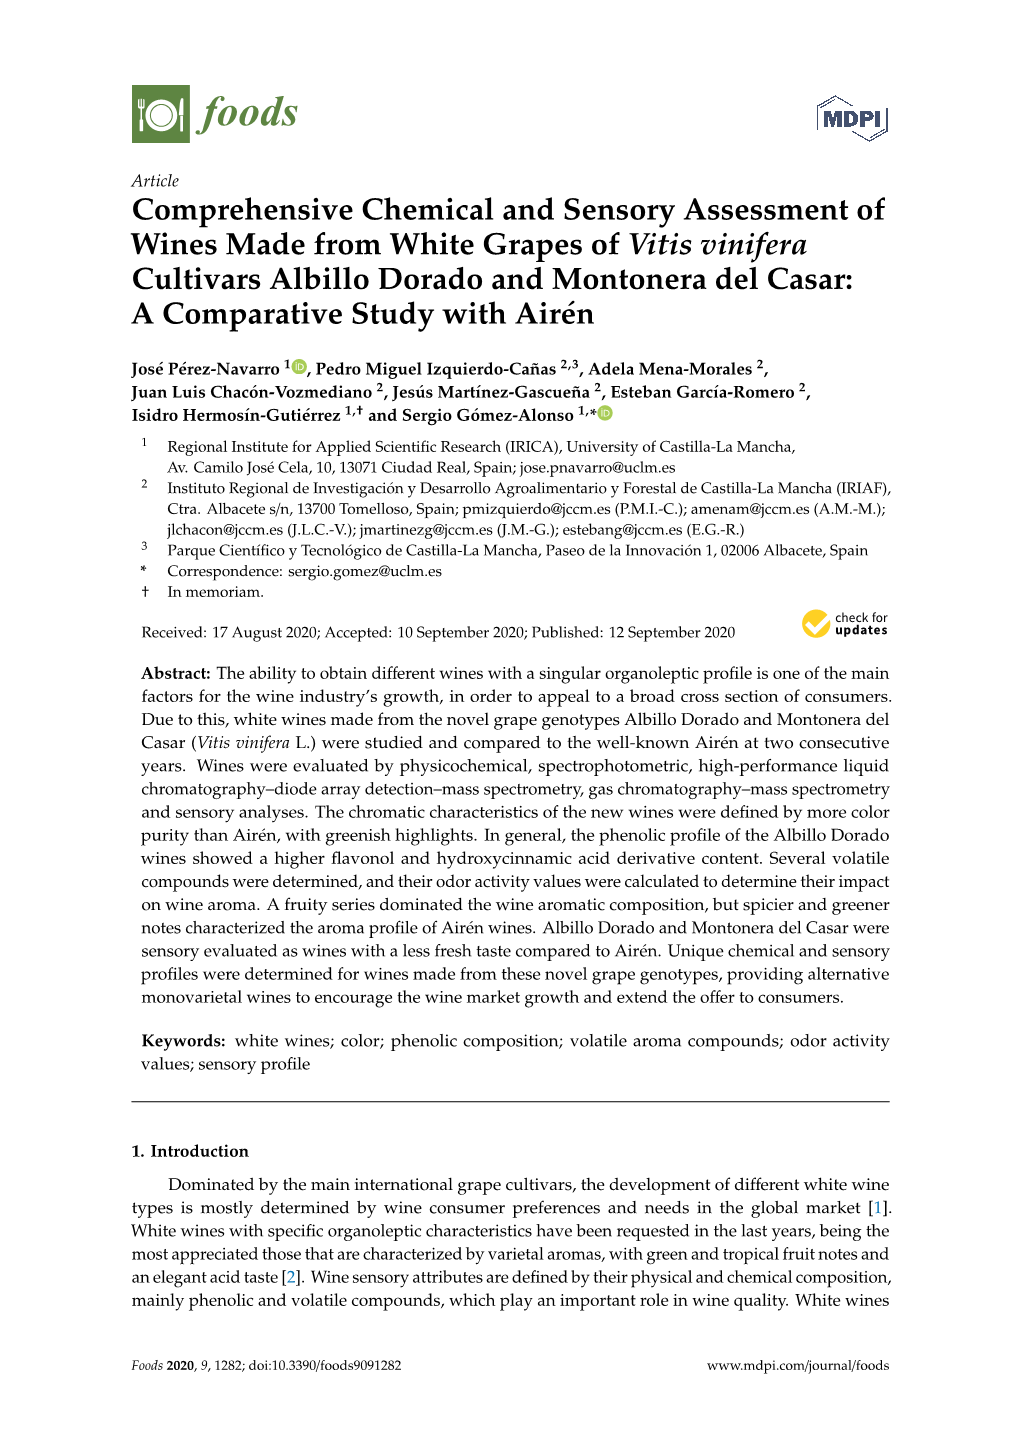 Comprehensive Chemical and Sensory Assessment of Wines Made from White Grapes of Vitis Vinifera Cultivars Albillo Dorado And